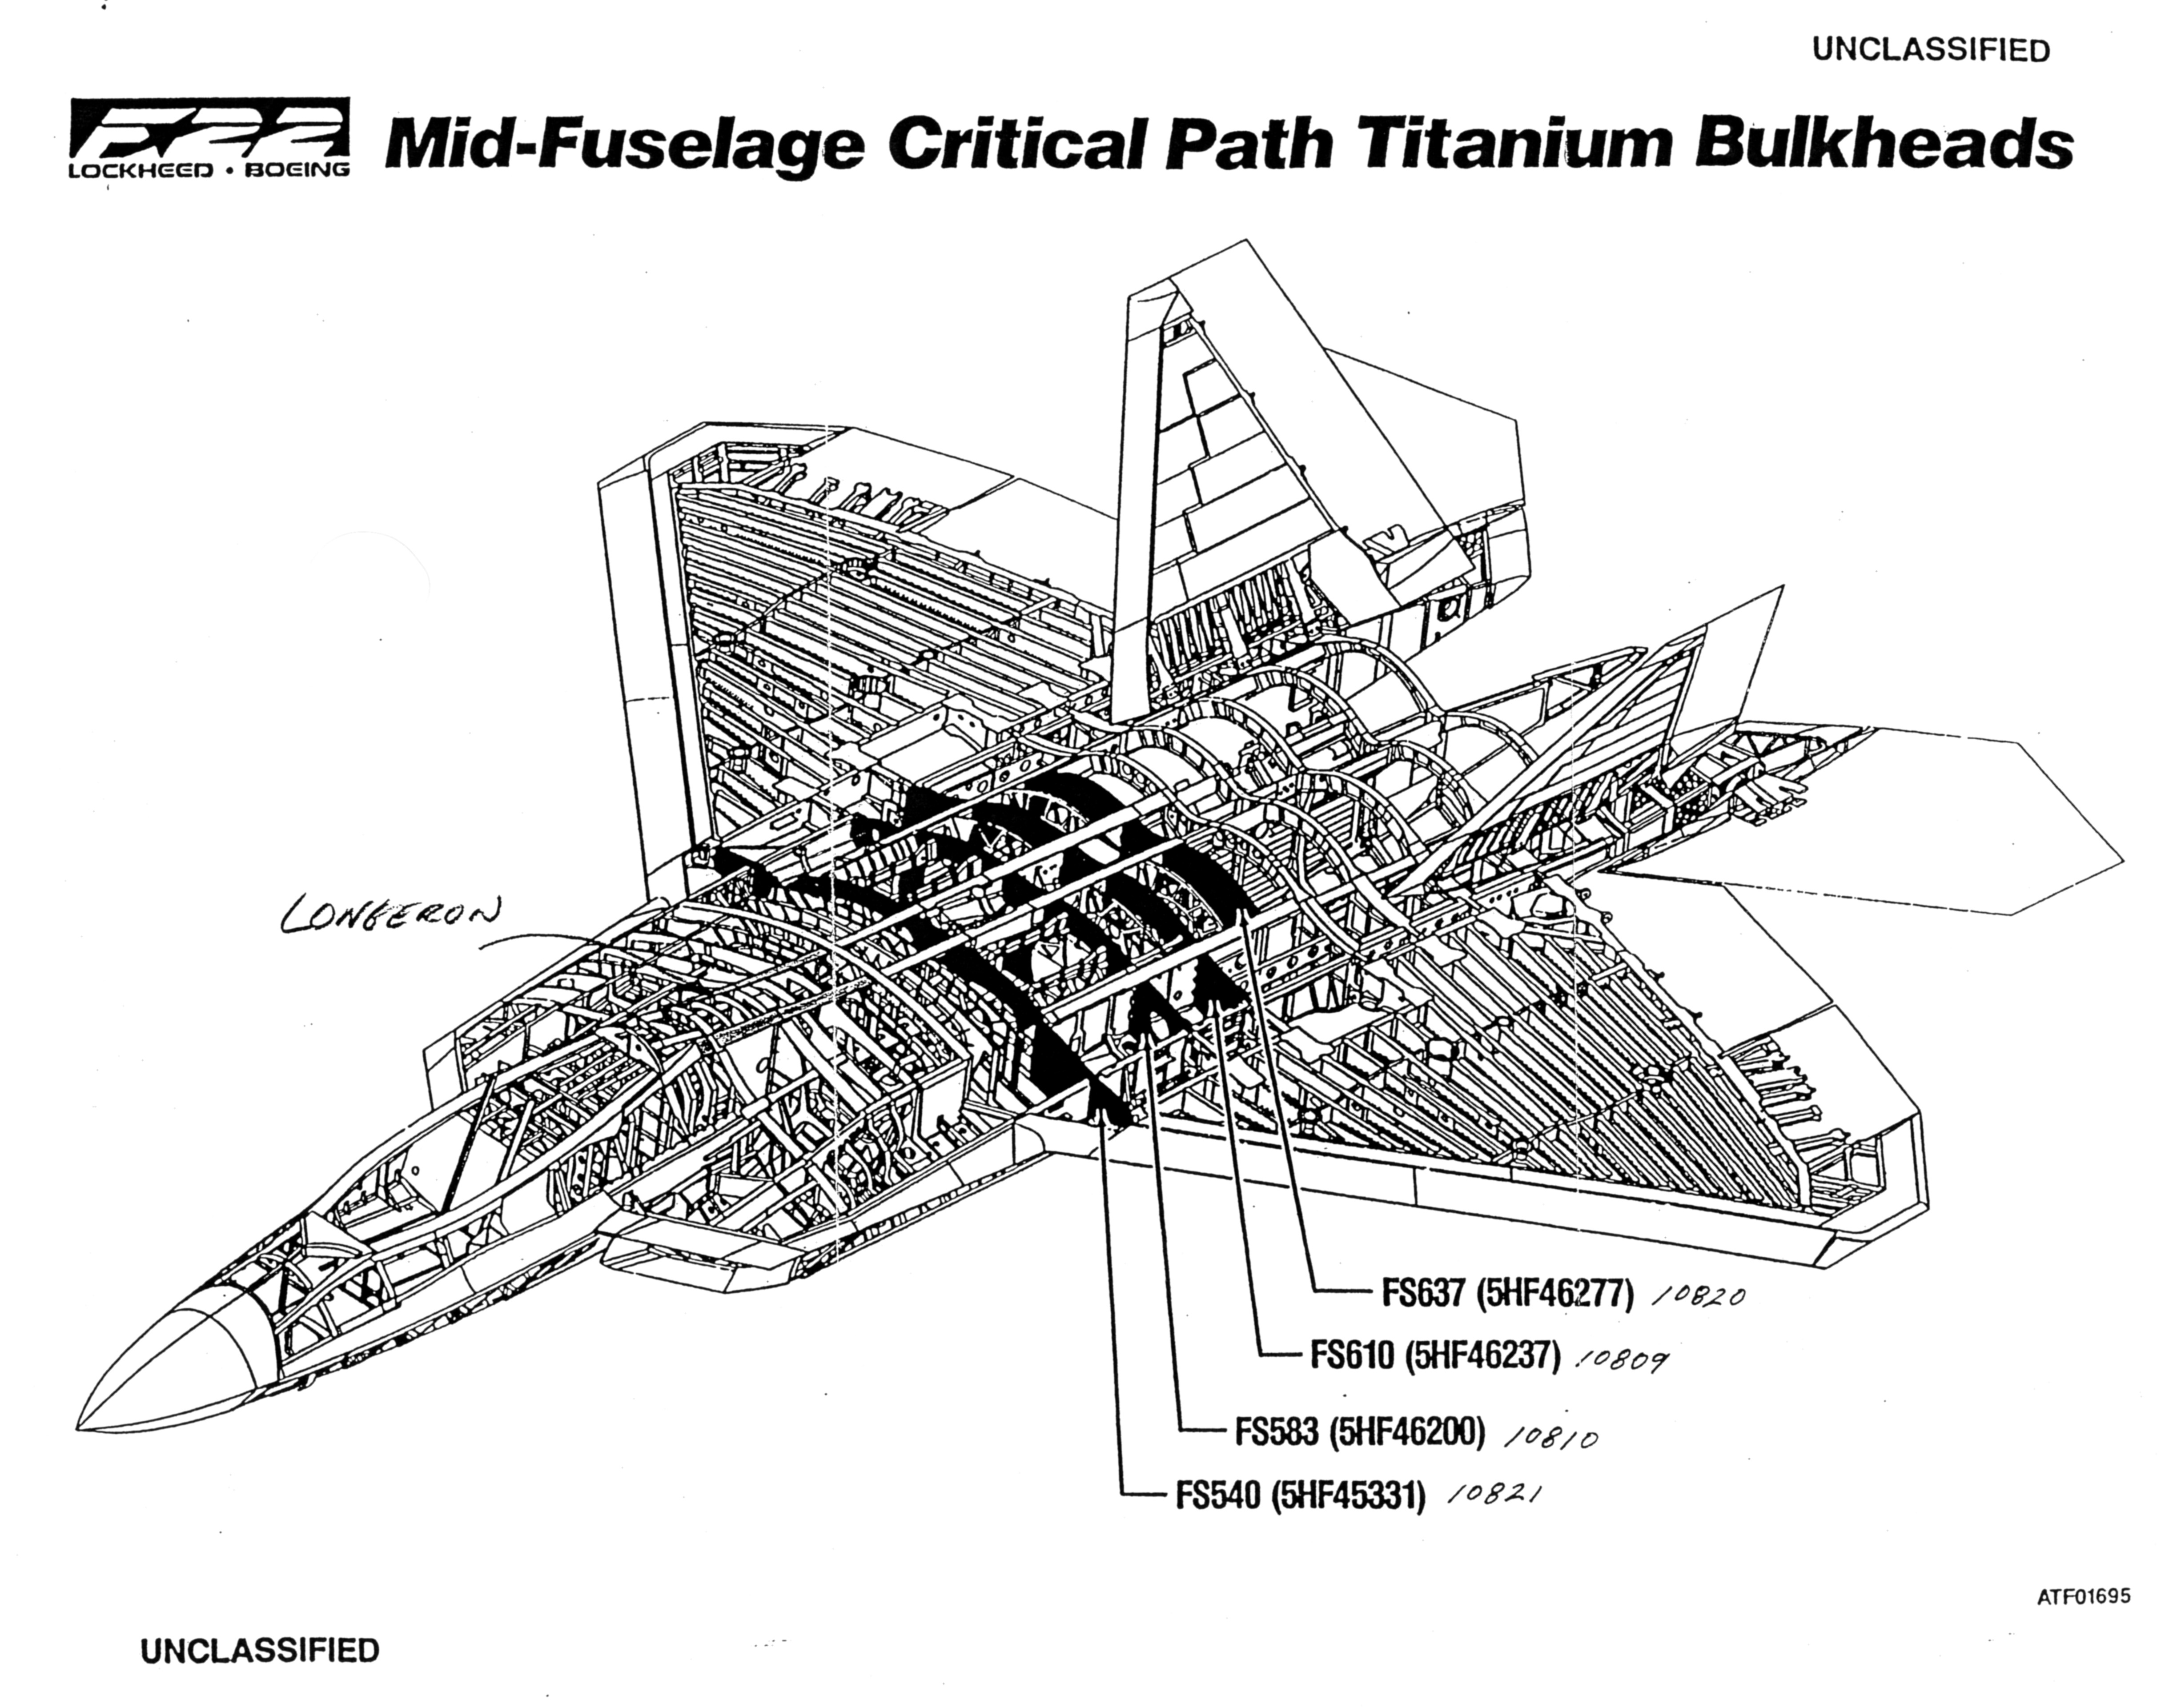 Detailed F-22 engineering drawing from the manufacturer.